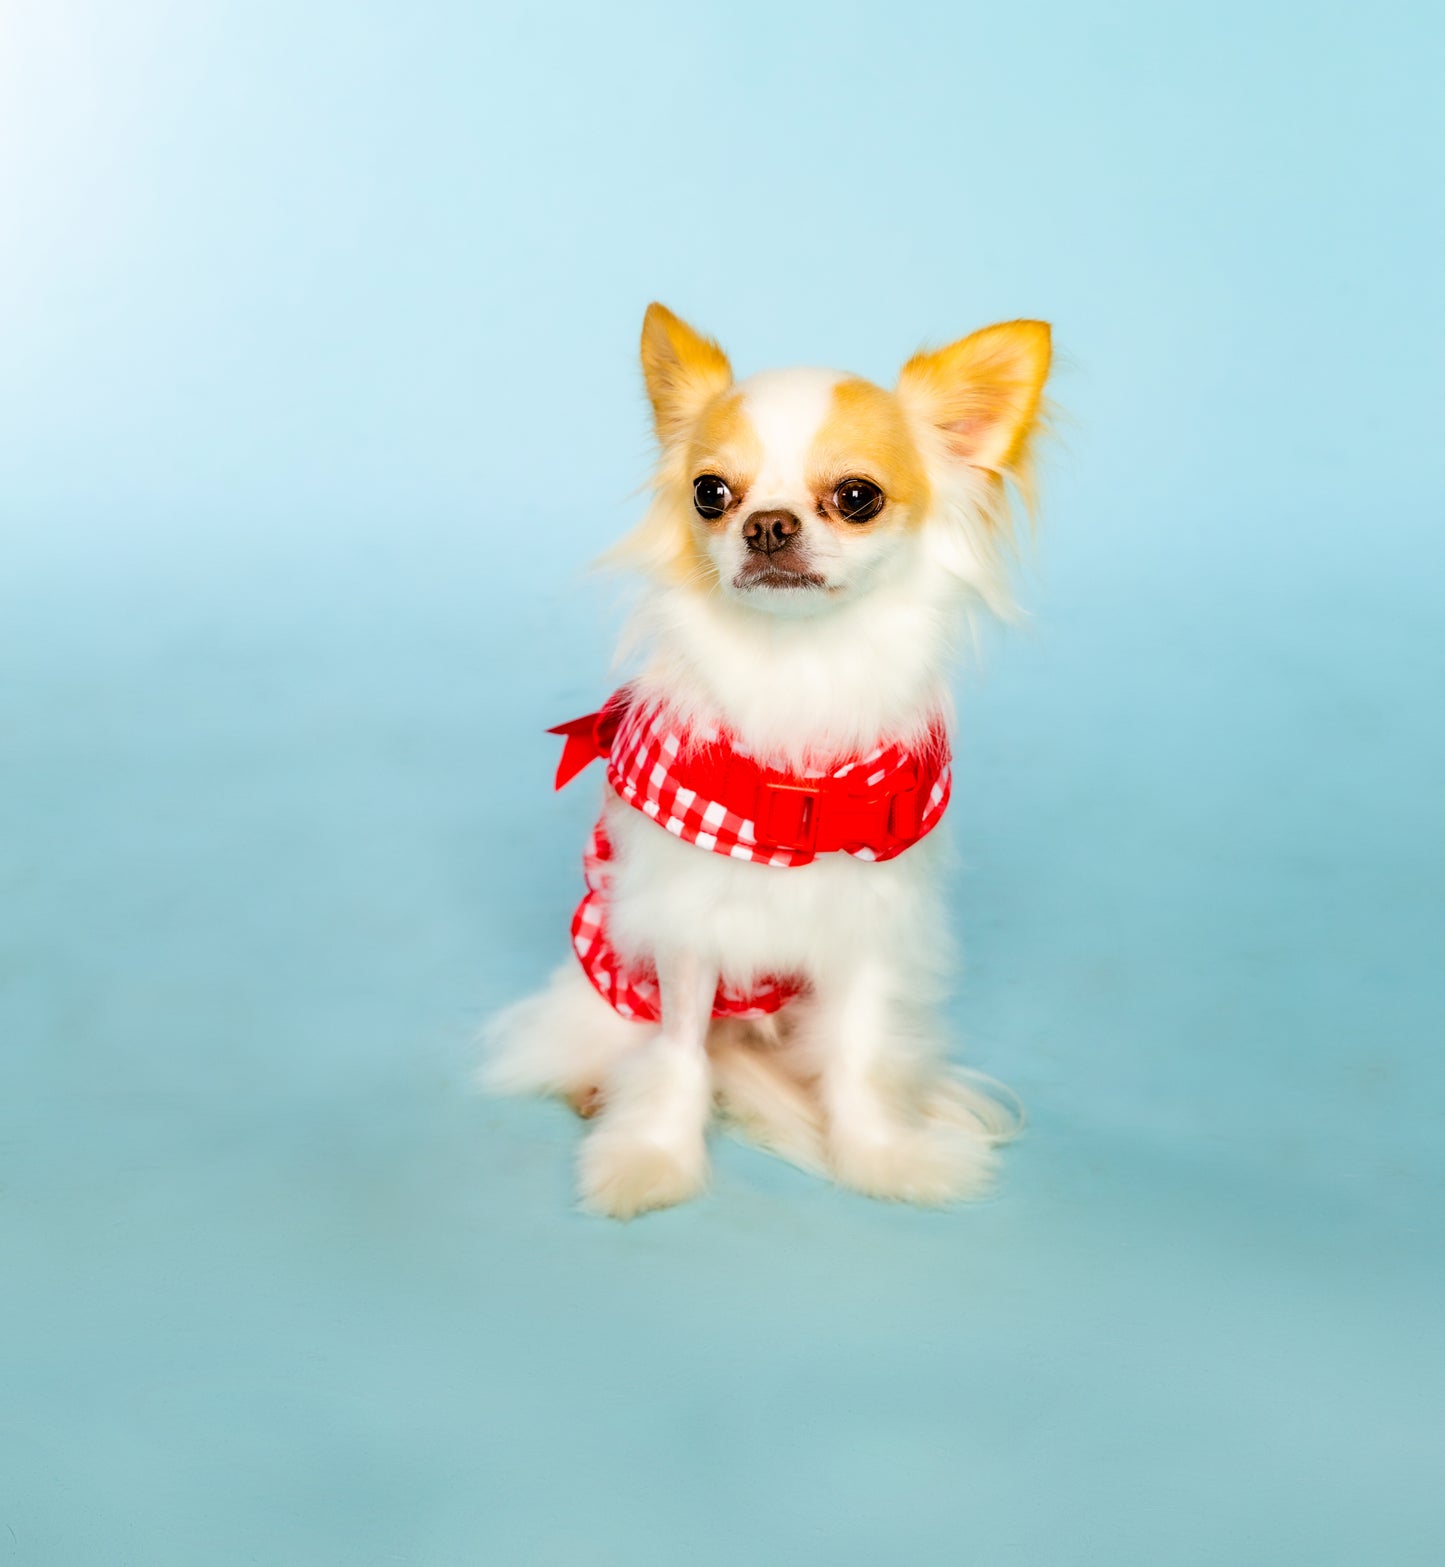 Gingham Print Body Harness for Pets